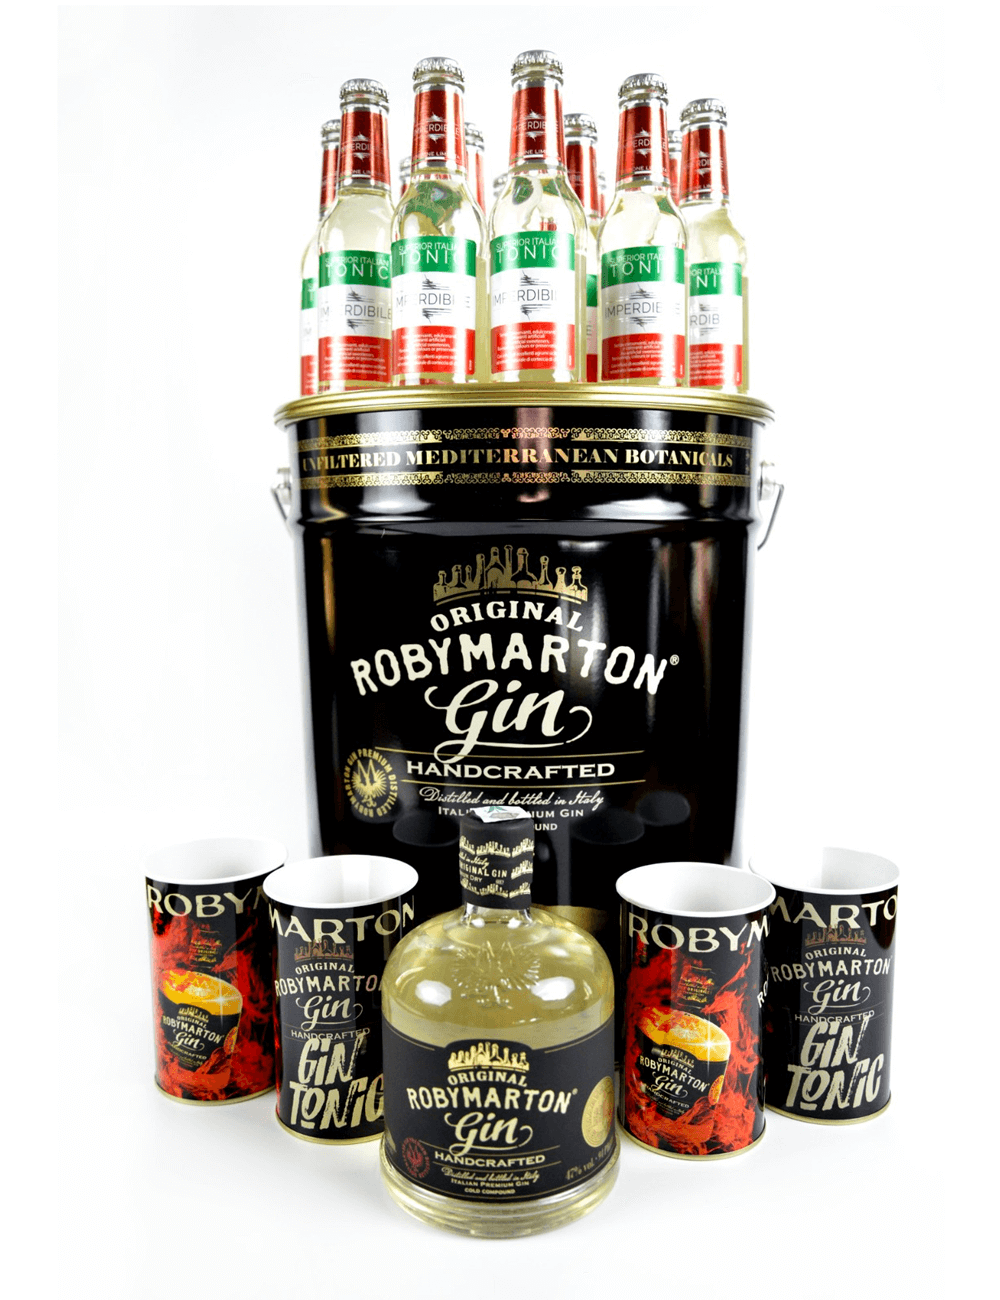 Roby marton gin and tonic party box